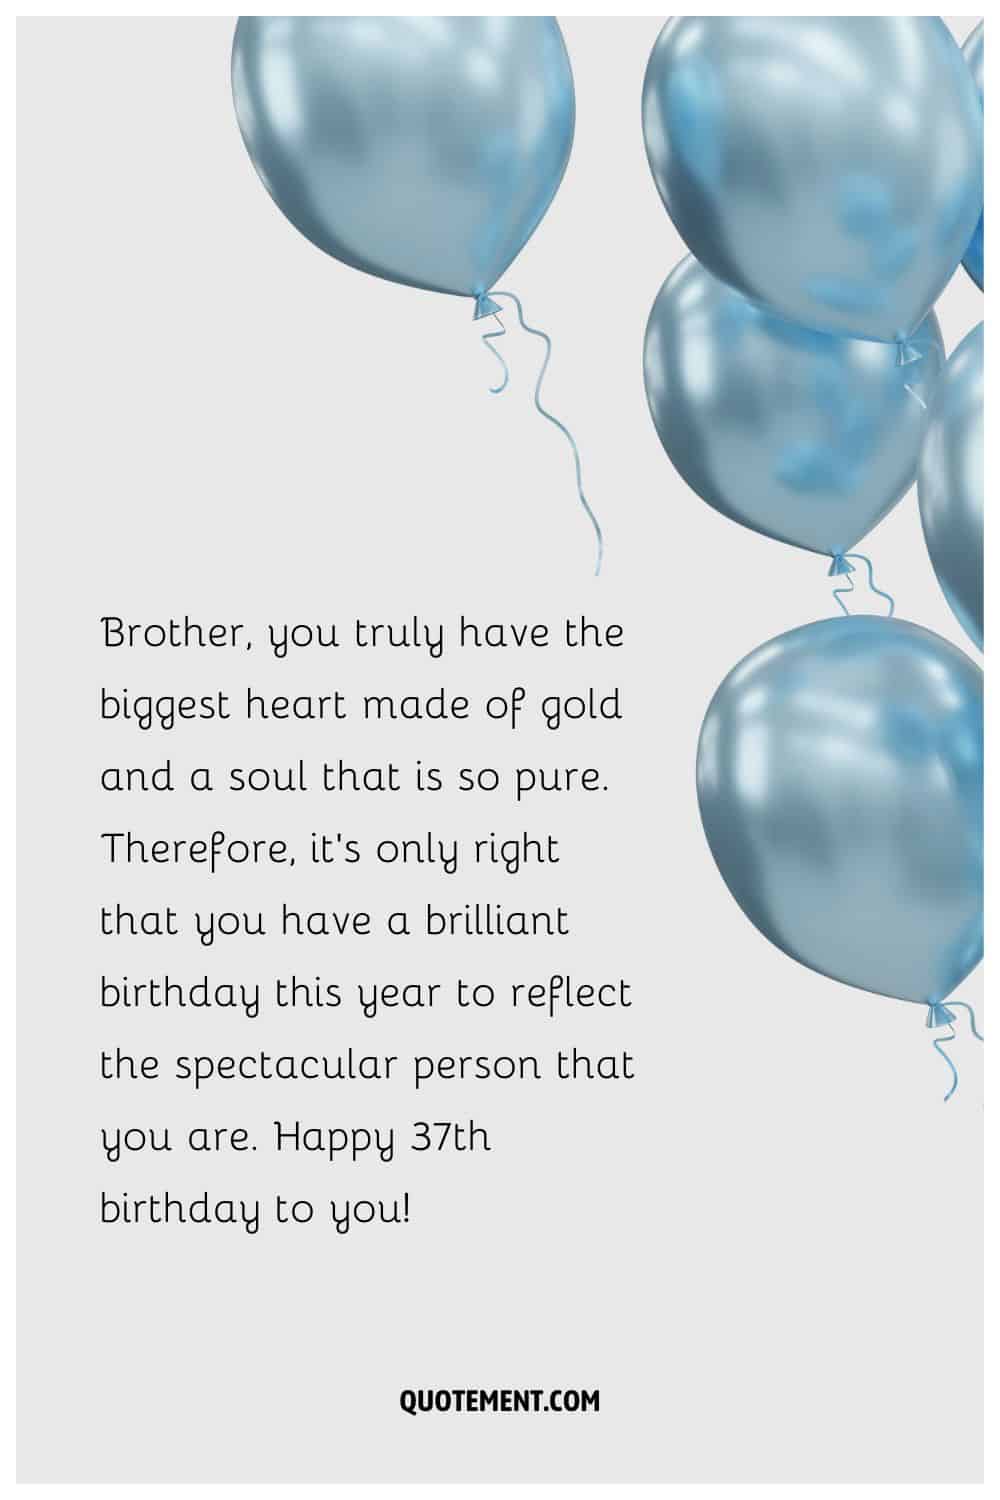 Touching message for brother's 37th birthday and blue balloons.